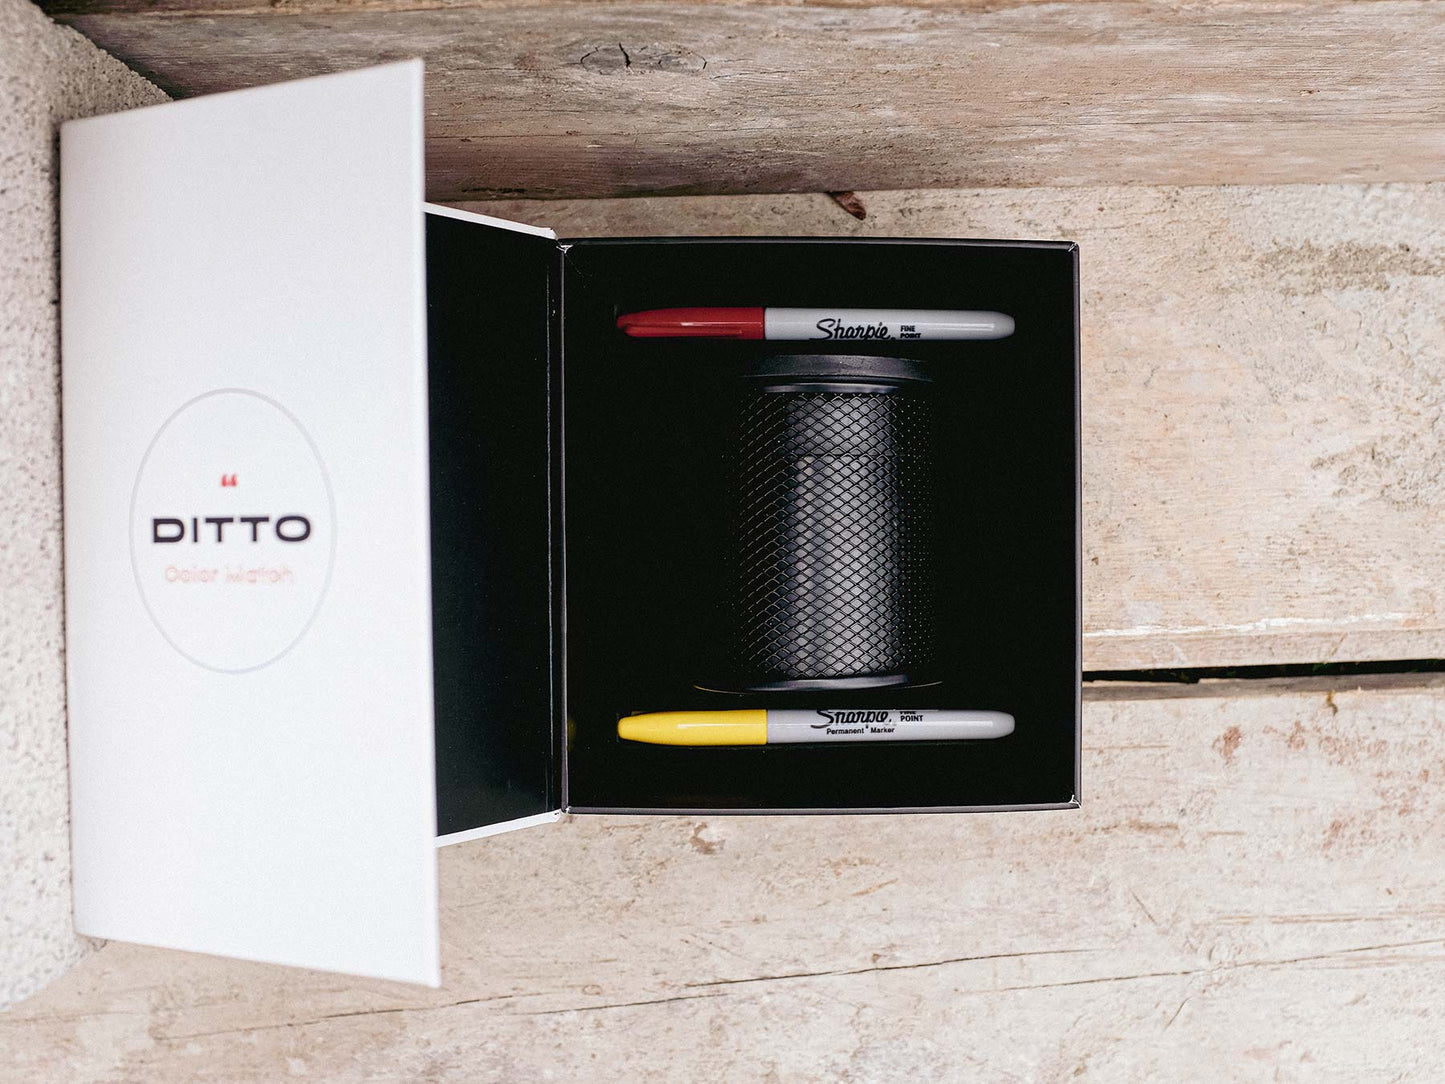 Ditto by Ellusionist